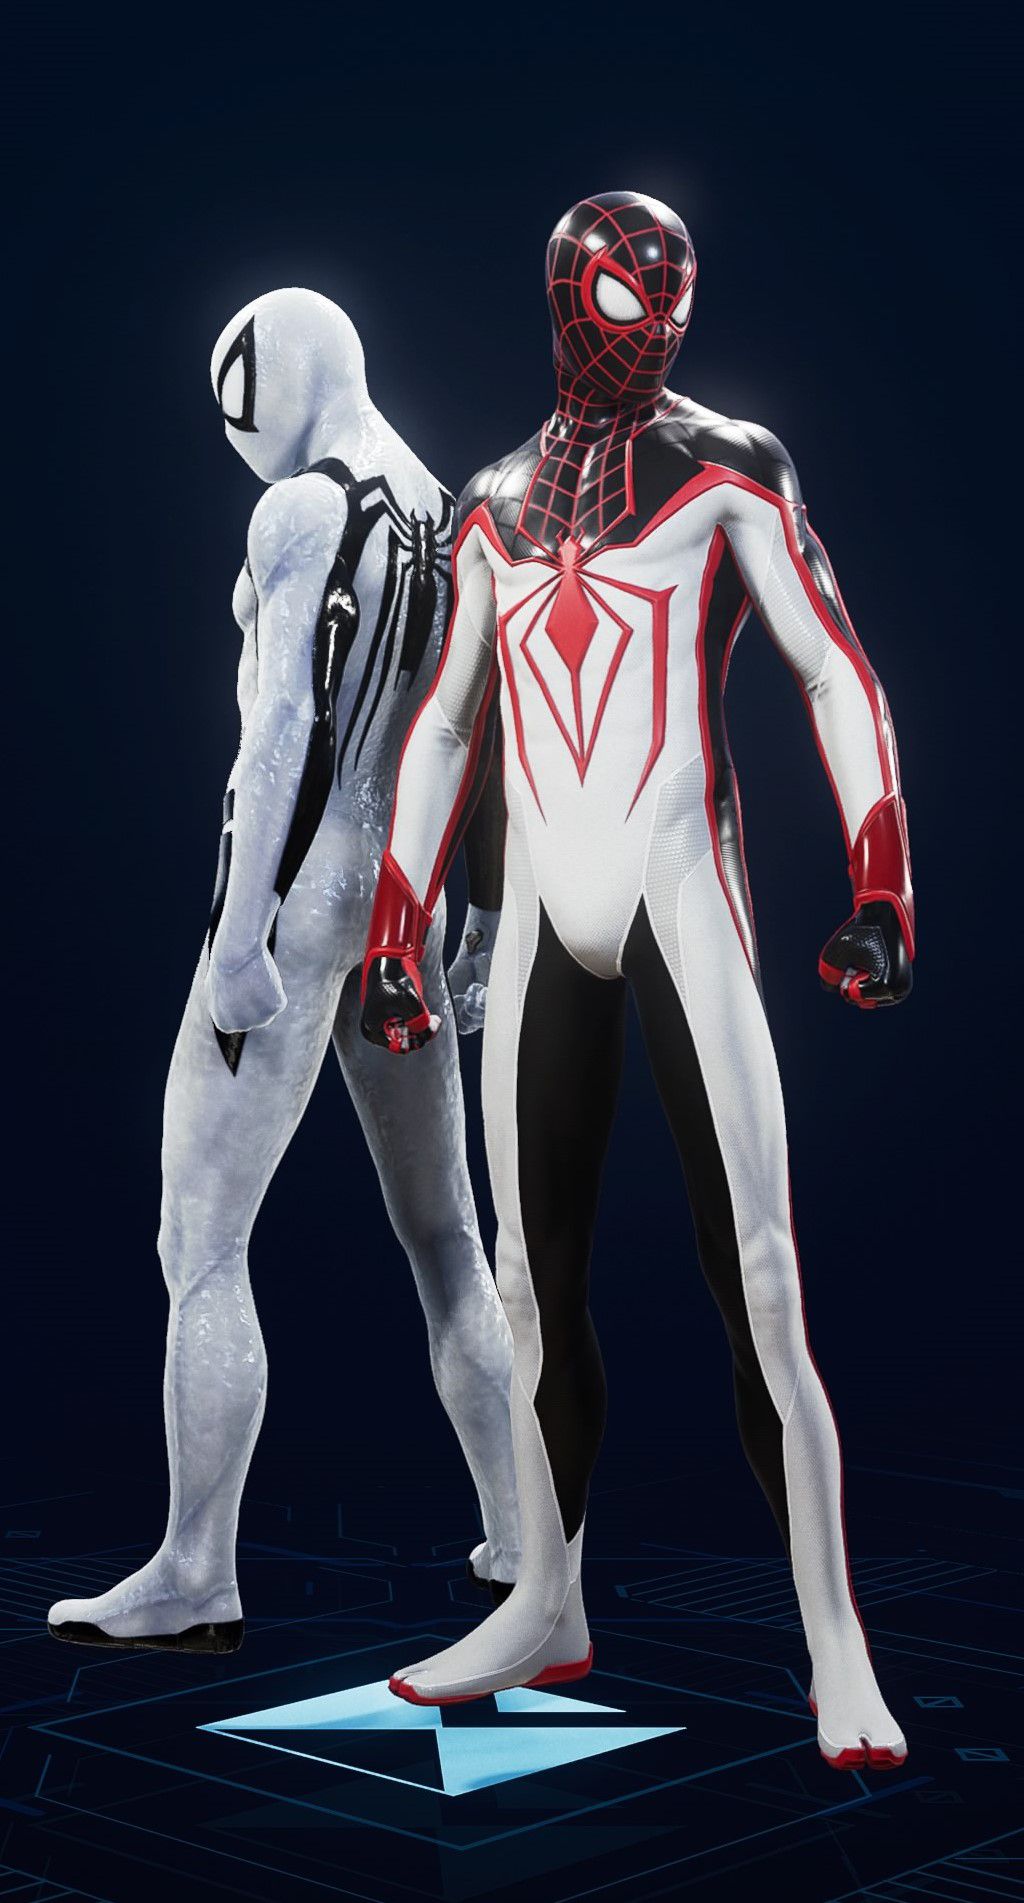 Miles Morales stands in his TRACK Suit in the suit selection screen of Spider-Man 2.